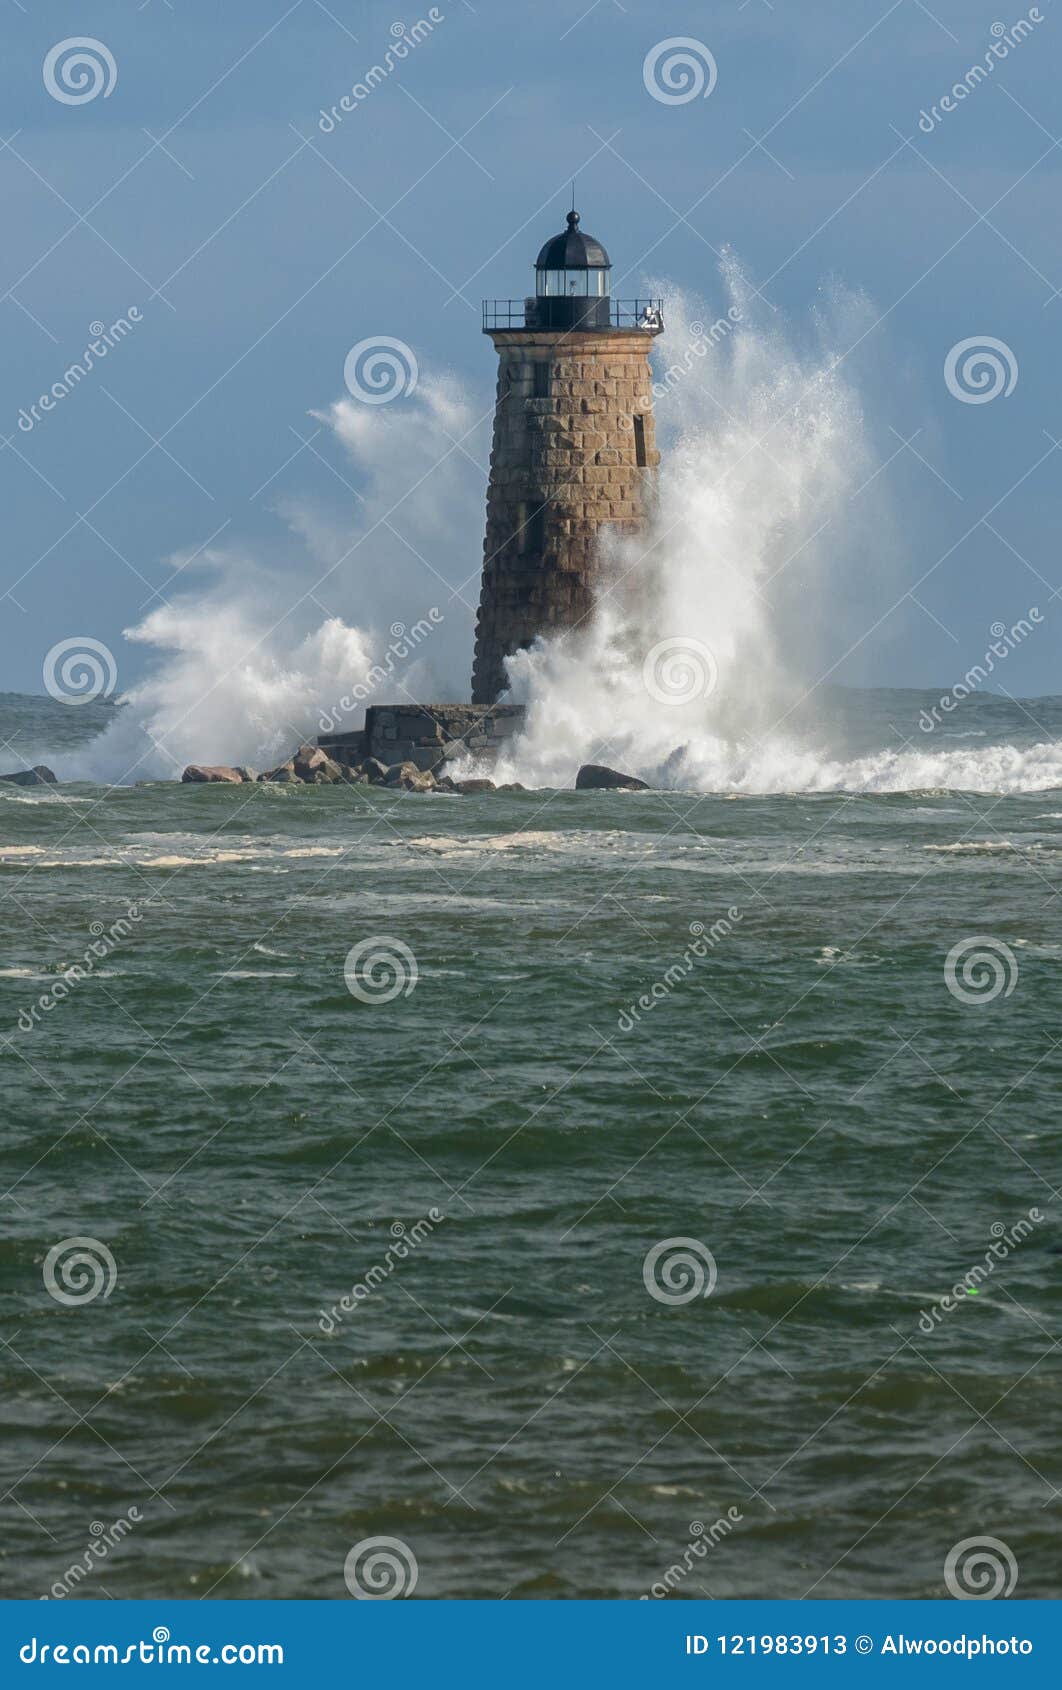 giant waves surround stone lighthouse in maine